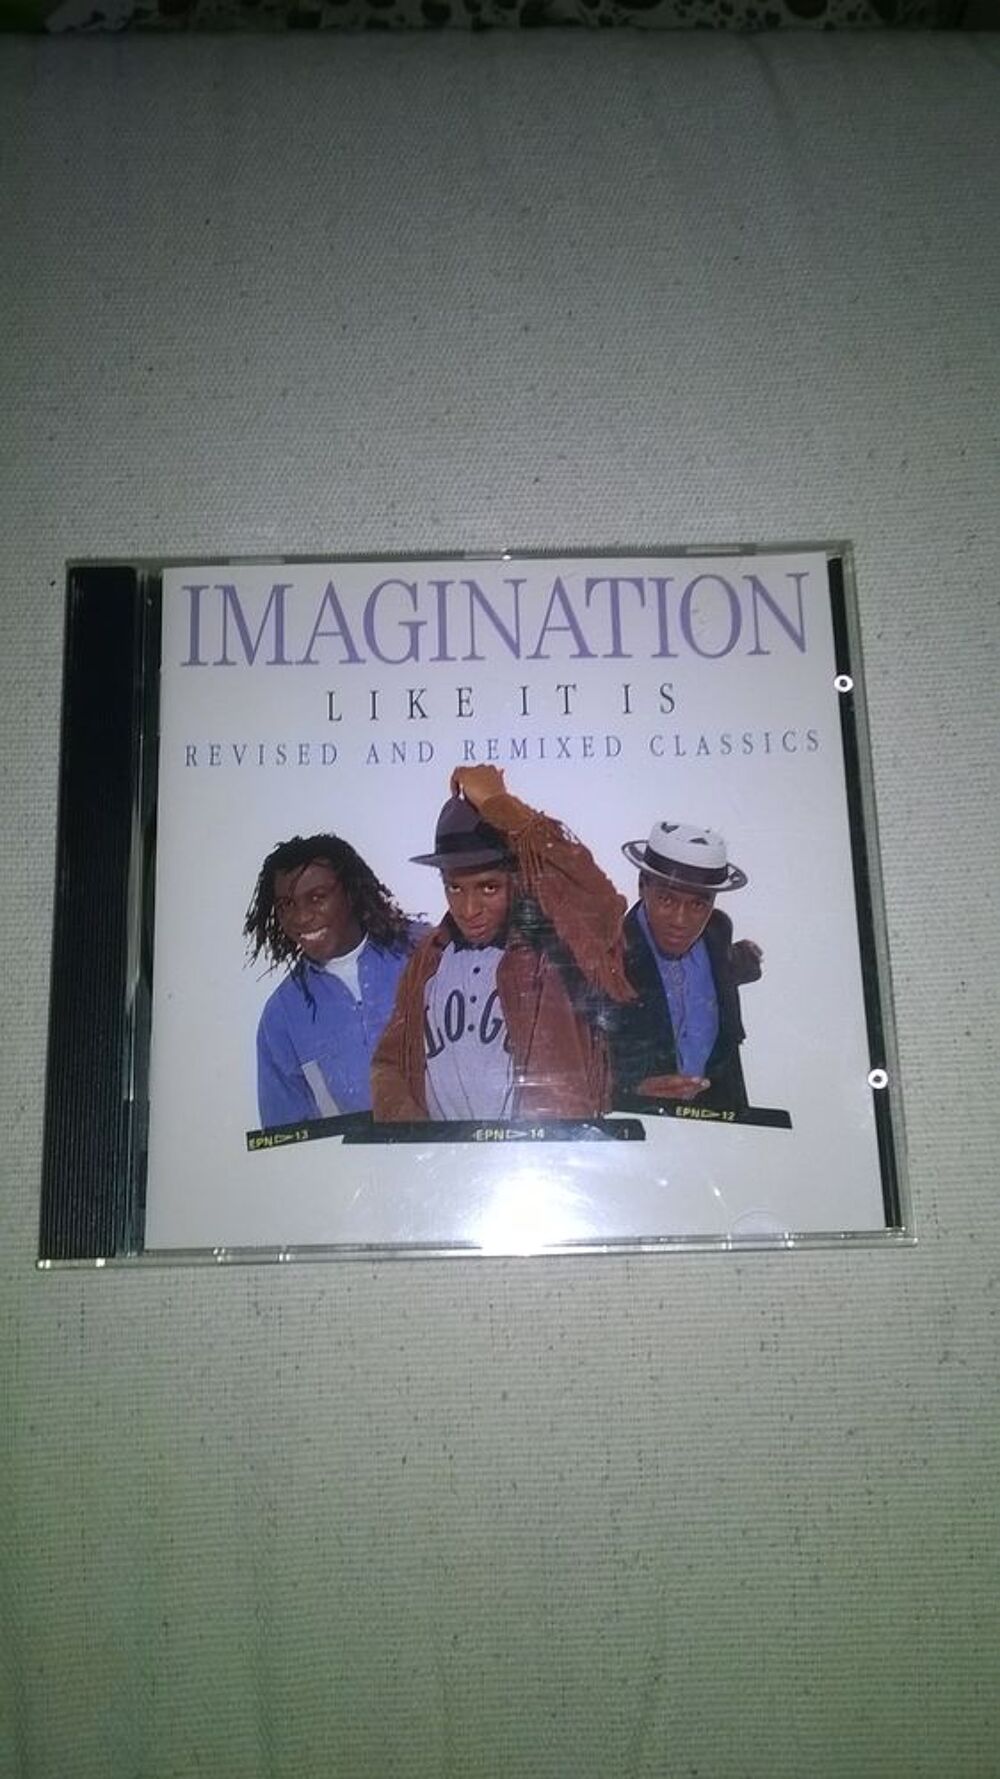 CD Imagination
Like It Is - Revised And Remixed Classics
1 CD et vinyles